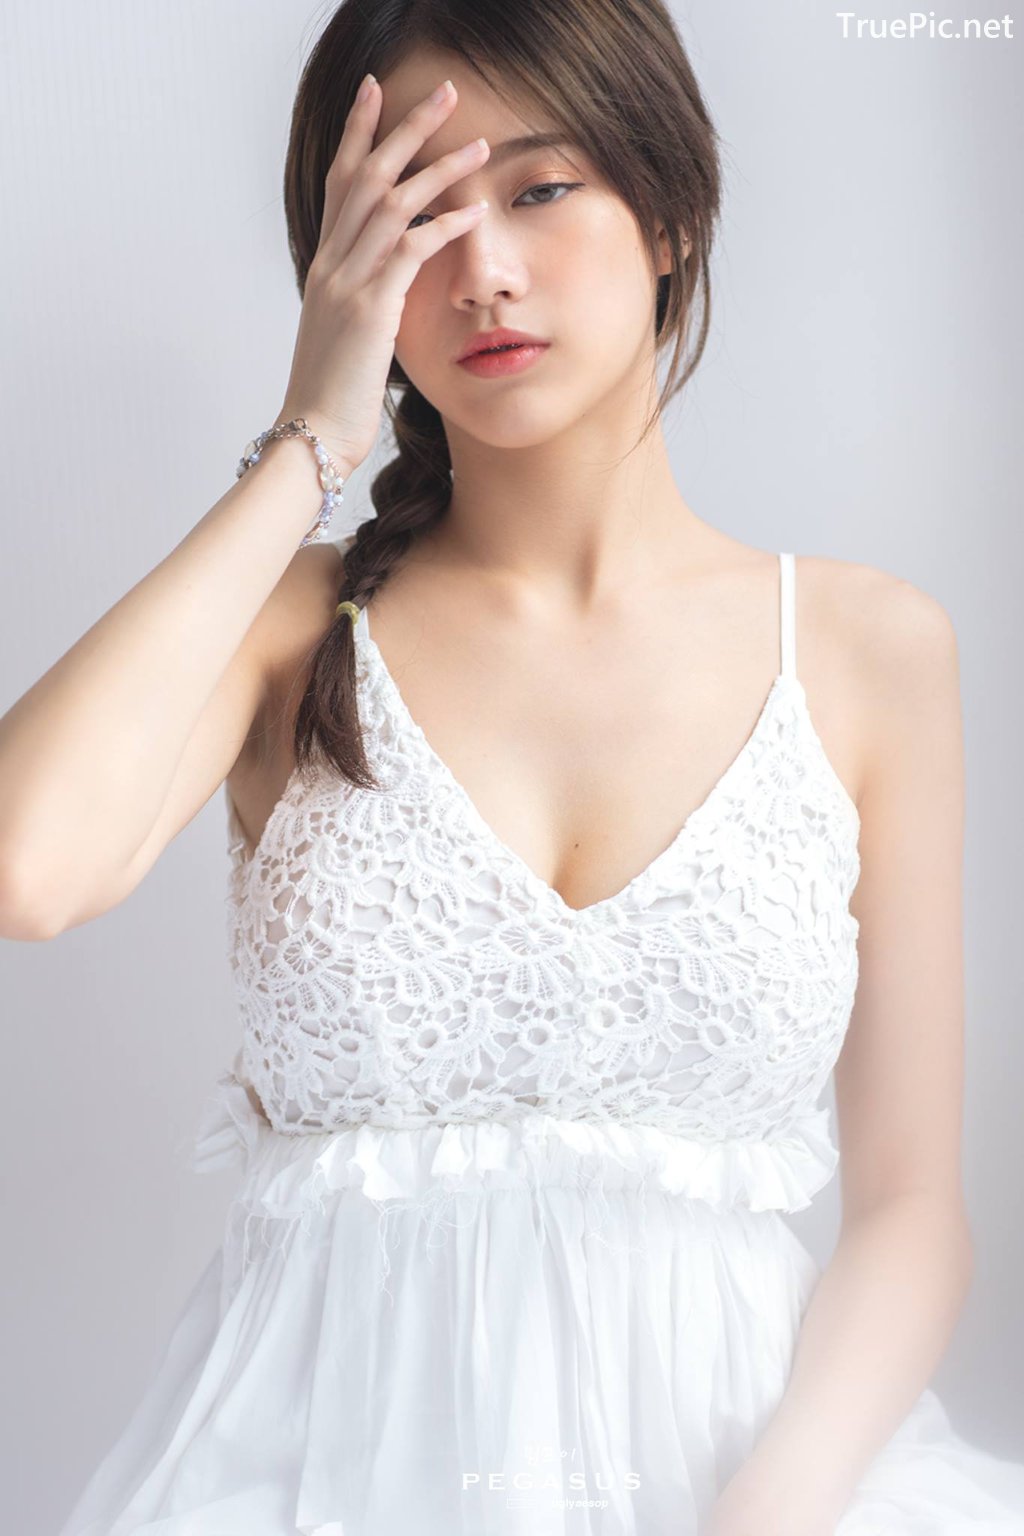 Image Thailand Model - Pimploy Chitranapawong - Beautiful In White - TruePic.net - Picture-9